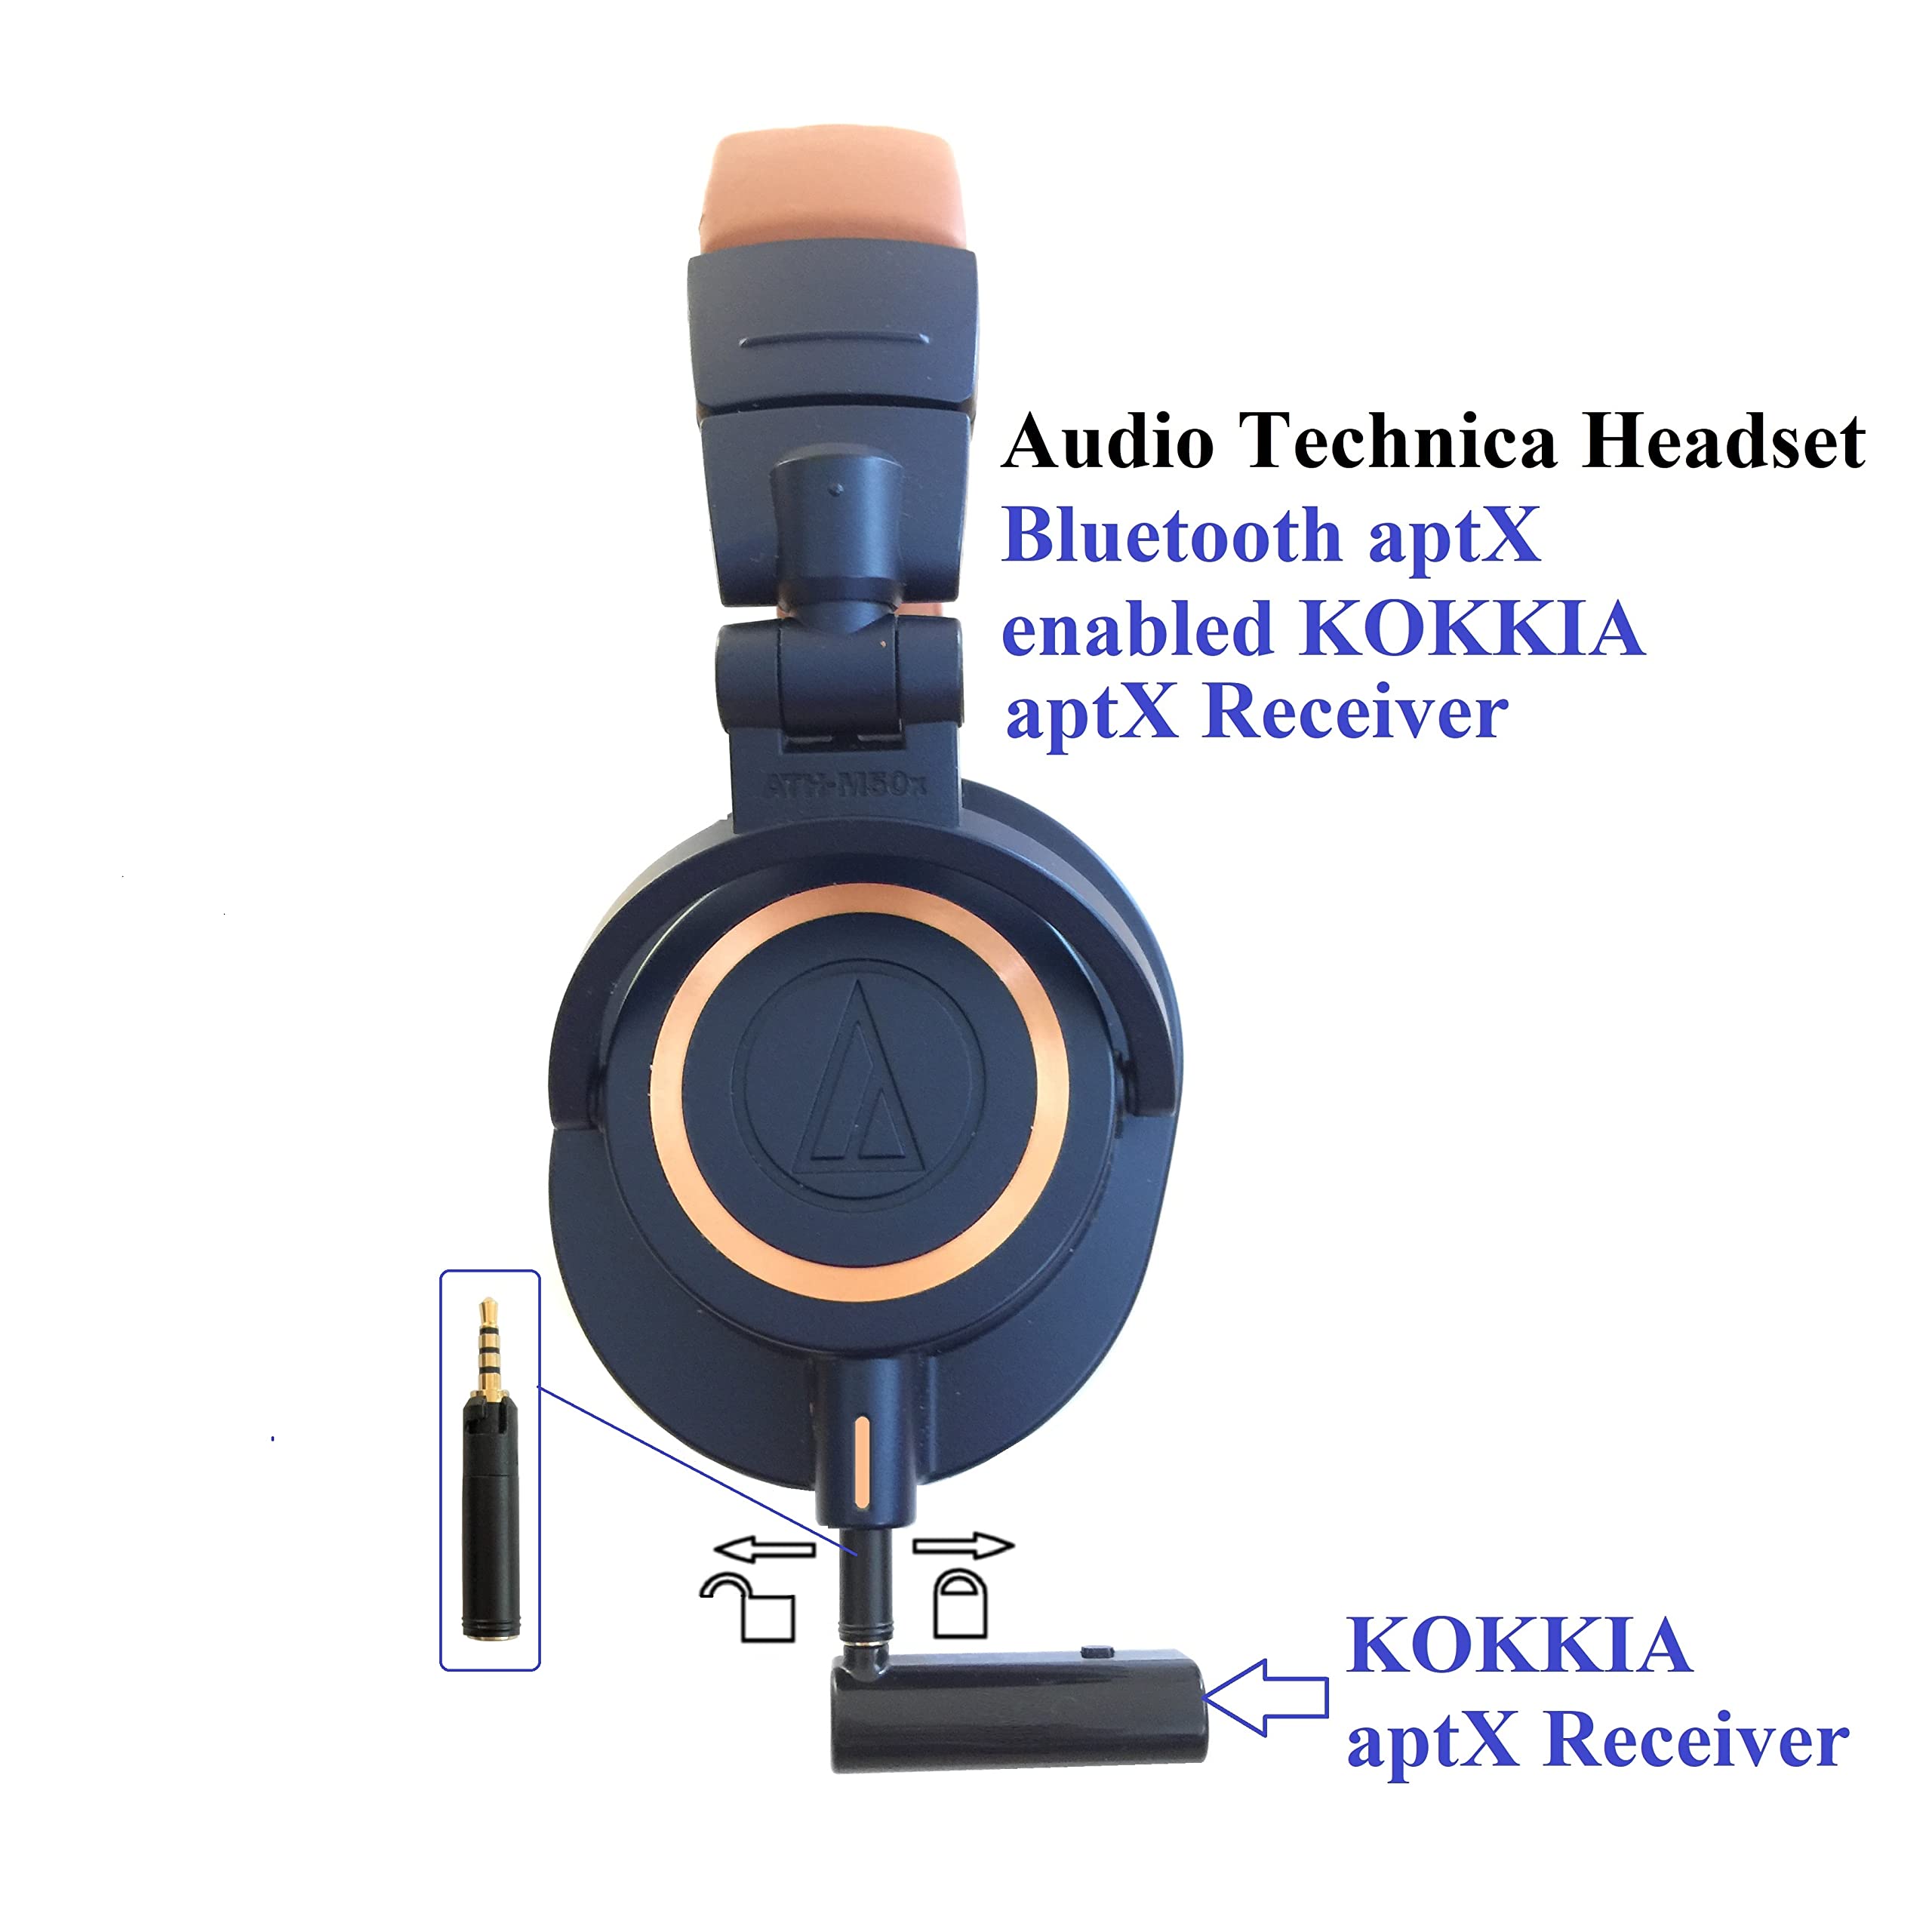 KOKKIA iReceiver aptX+ Bluetooth Stereo Receiver, Tiny Versatile 2.5mm Male to 3.5mm Female Adapter Included, Built-in Rechargeable Battery, Operational While Charging